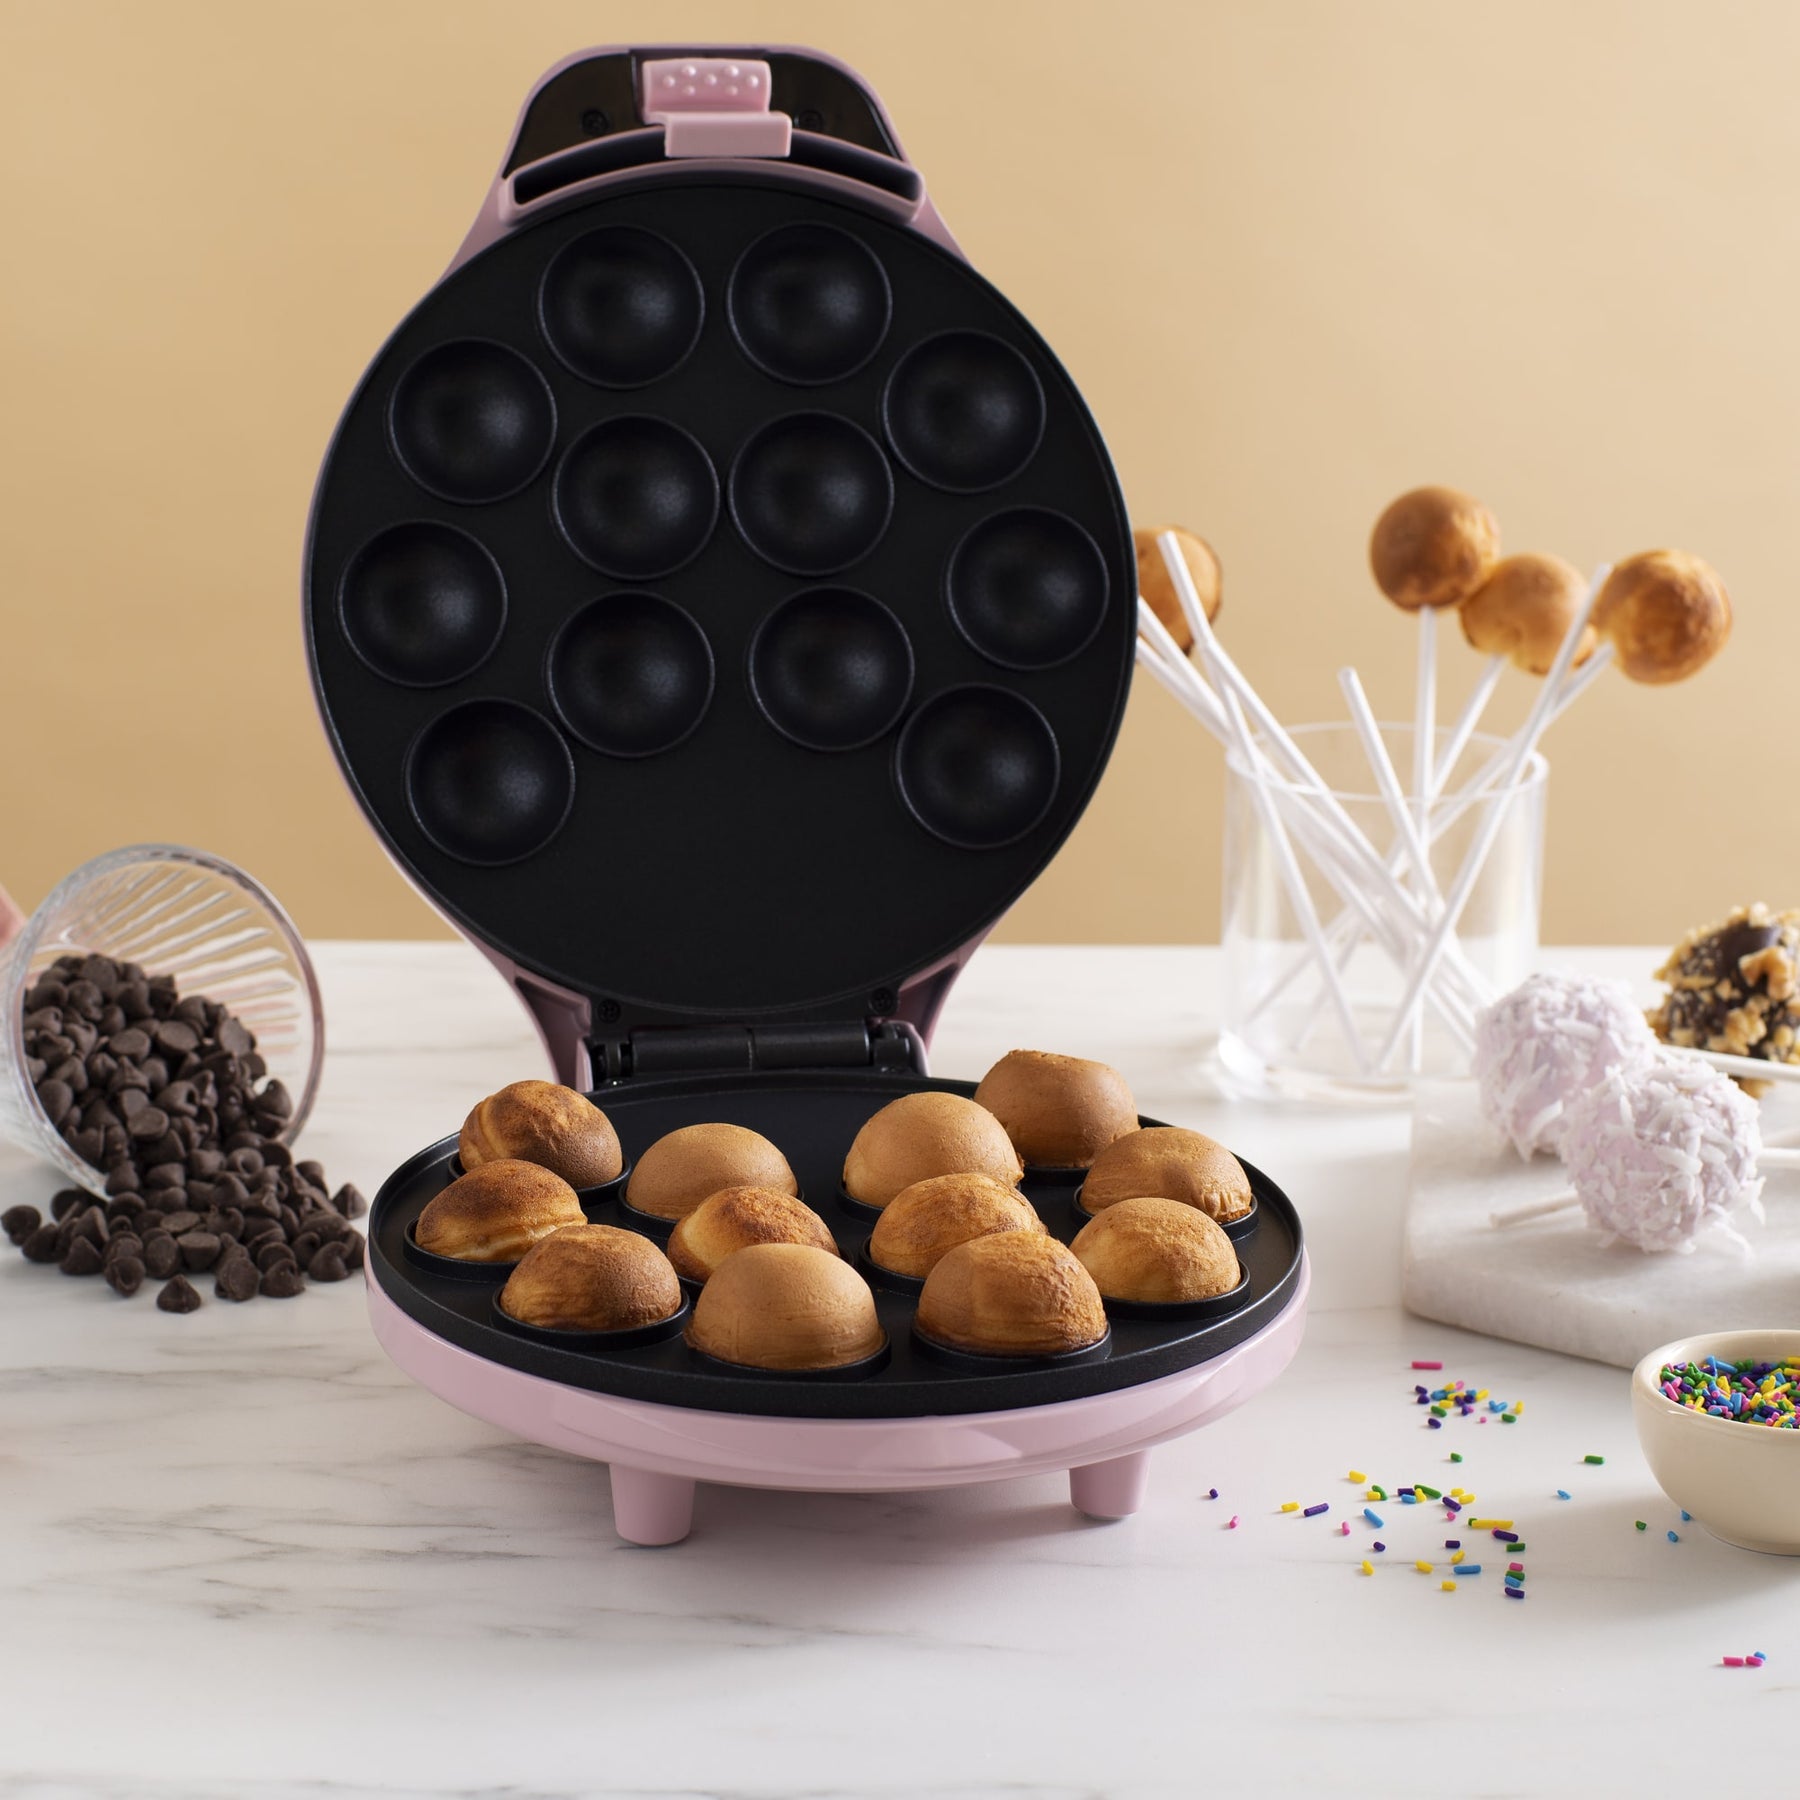 How To Use Babycakes Cake Pop Maker • Love From The Oven